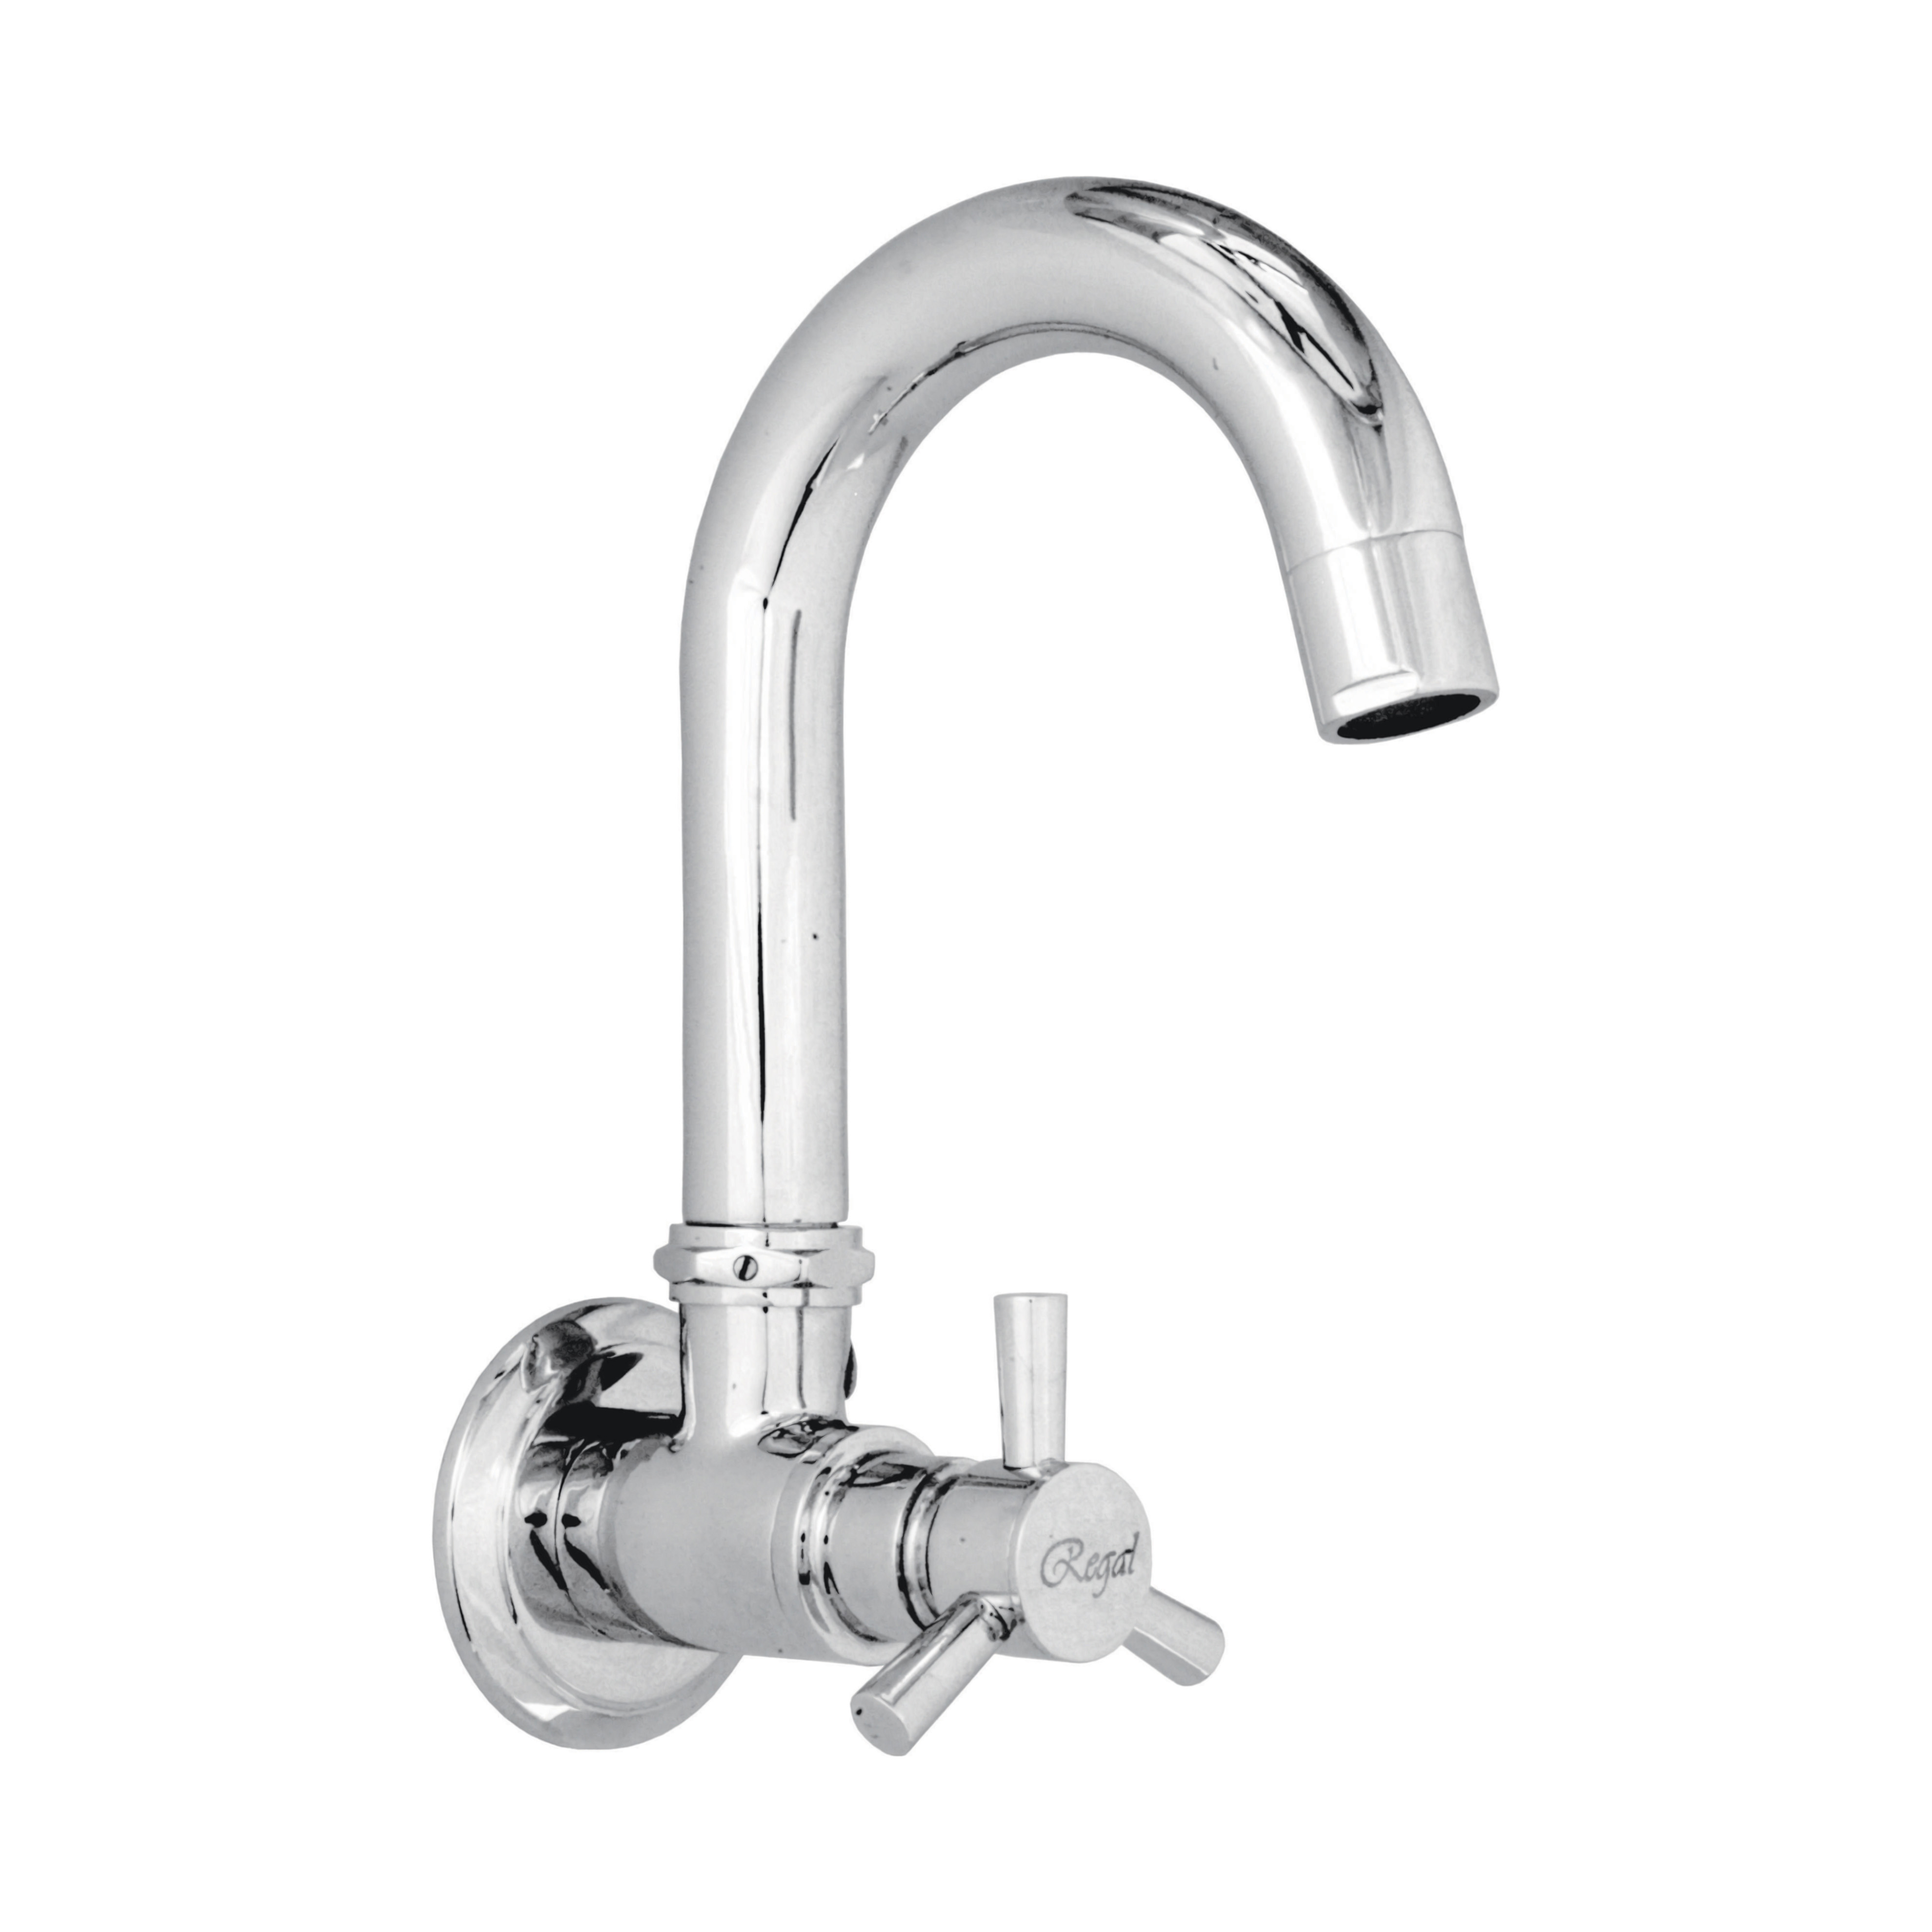 Apex Sink Cock Swivel Spout With Wall Flange